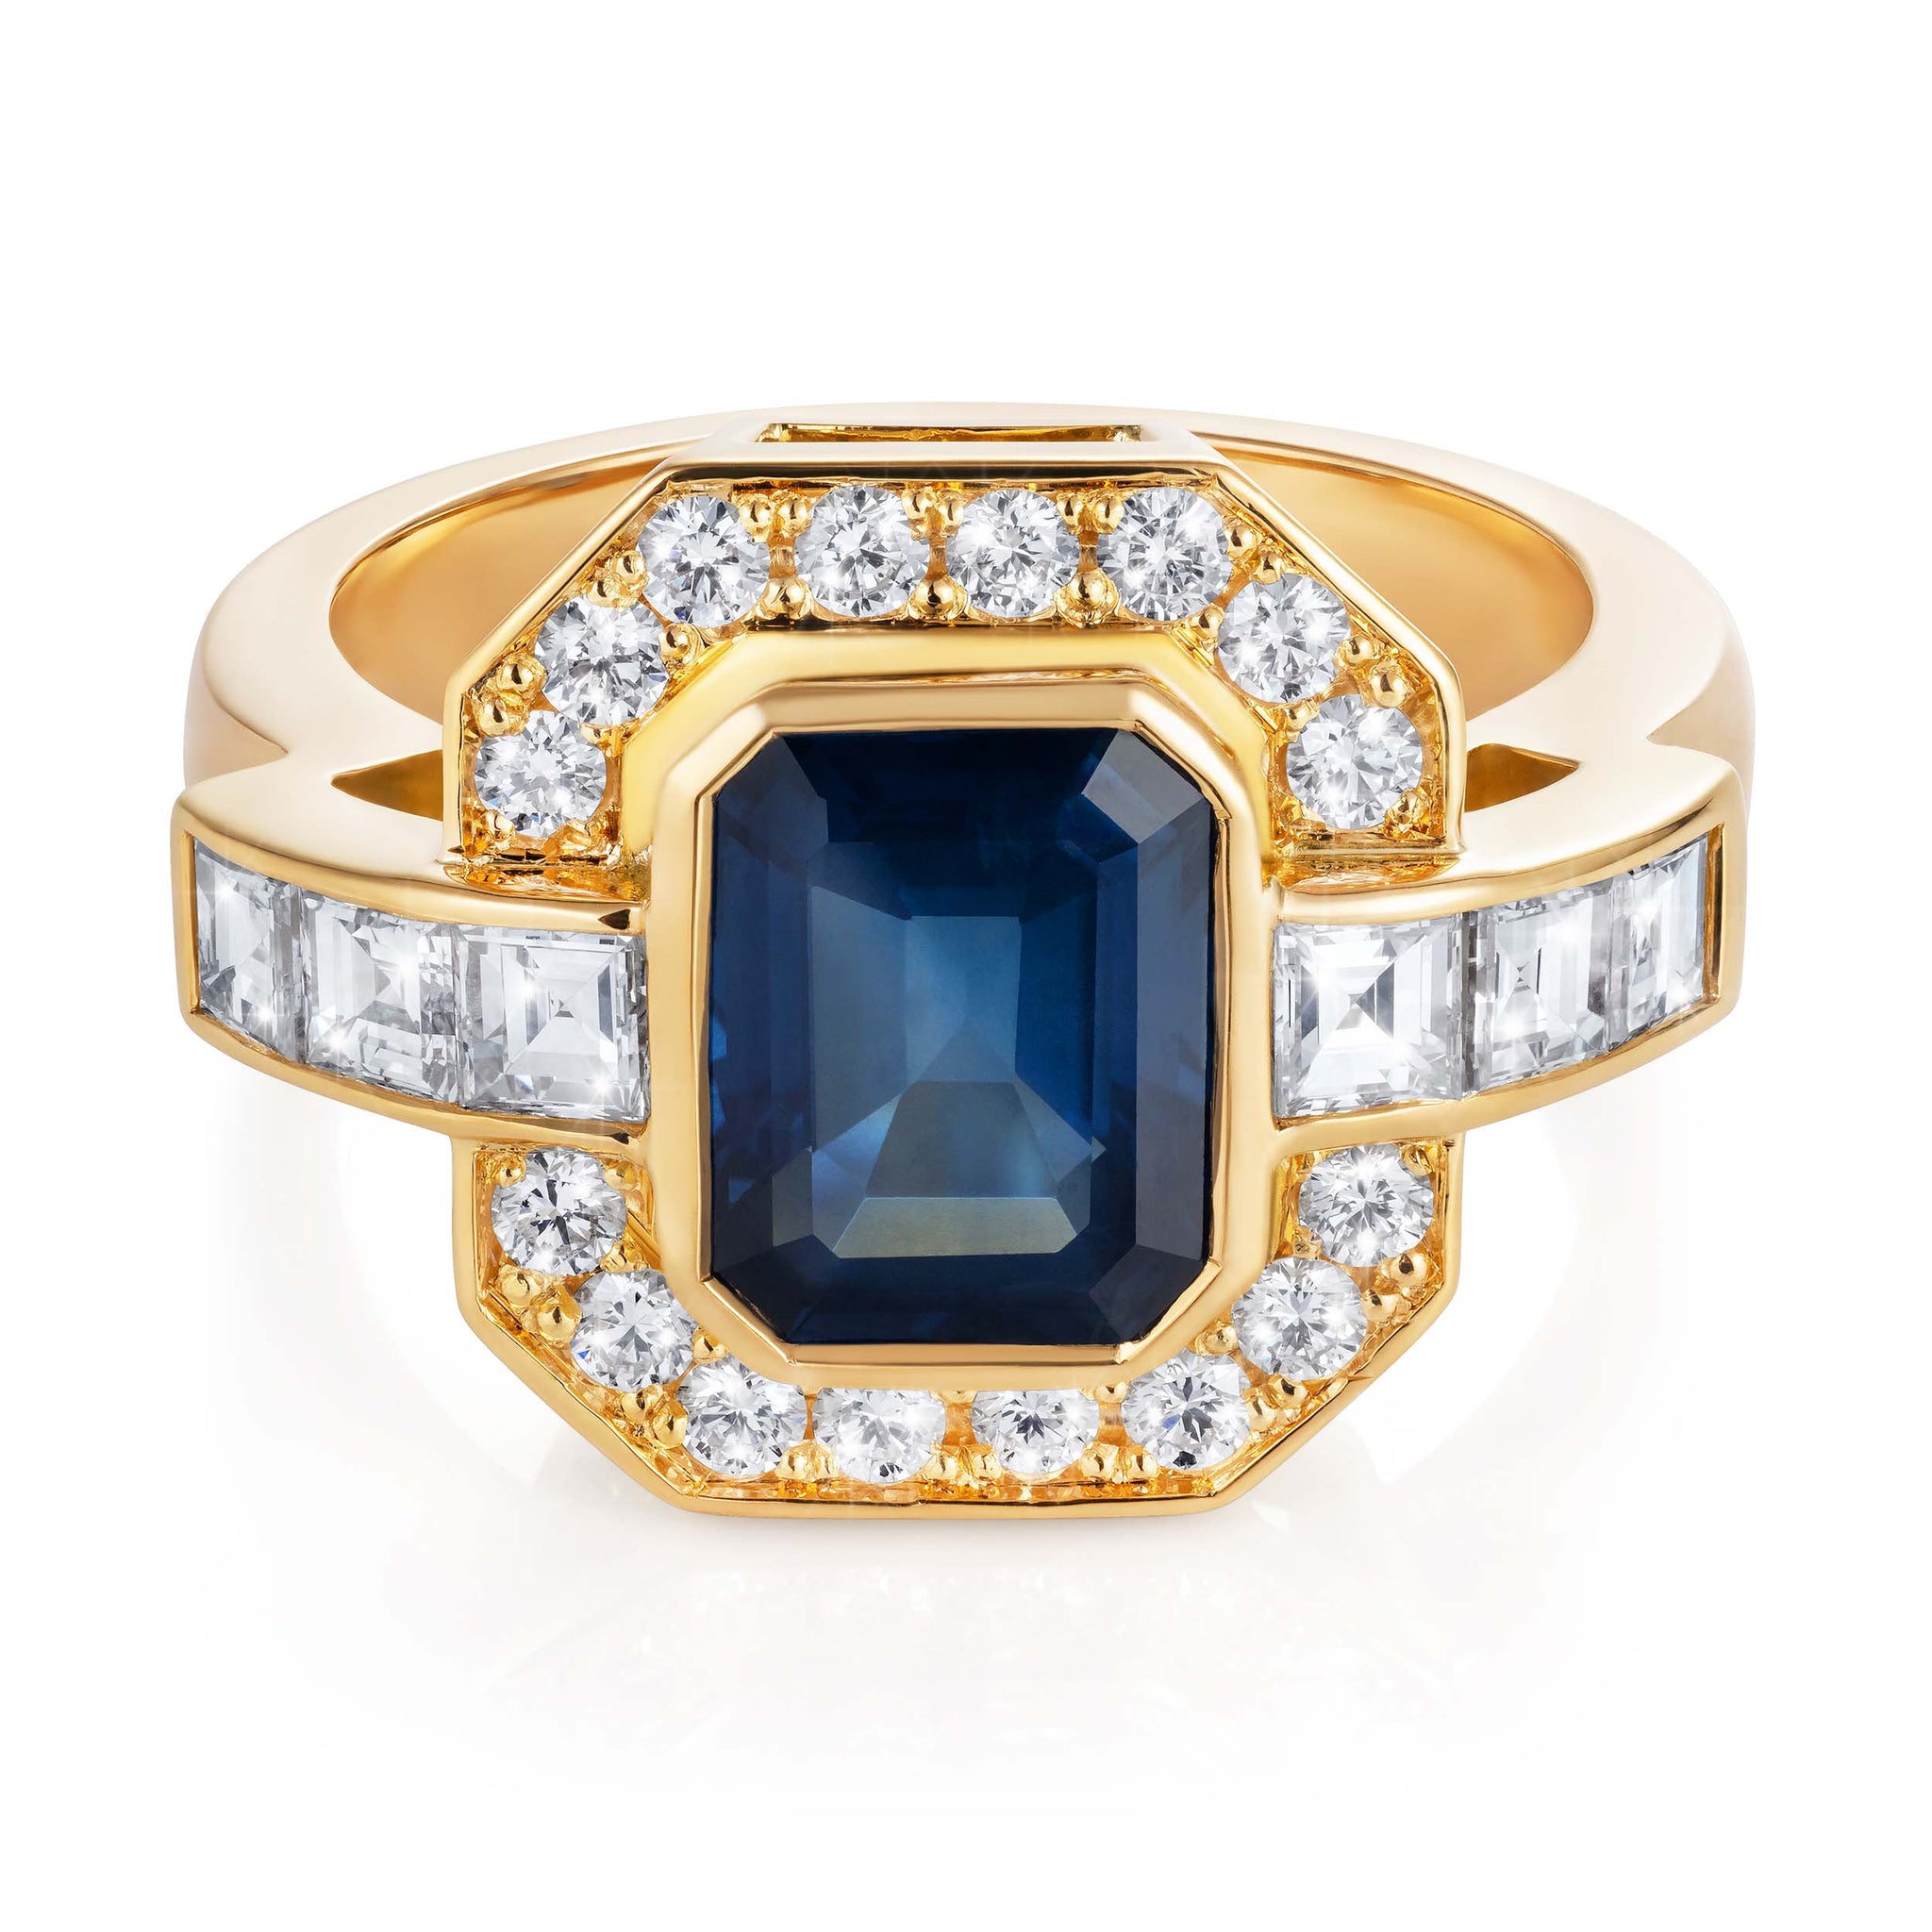 Bold Art Deco Sapphire Engagement Ring by Yasmin Everley